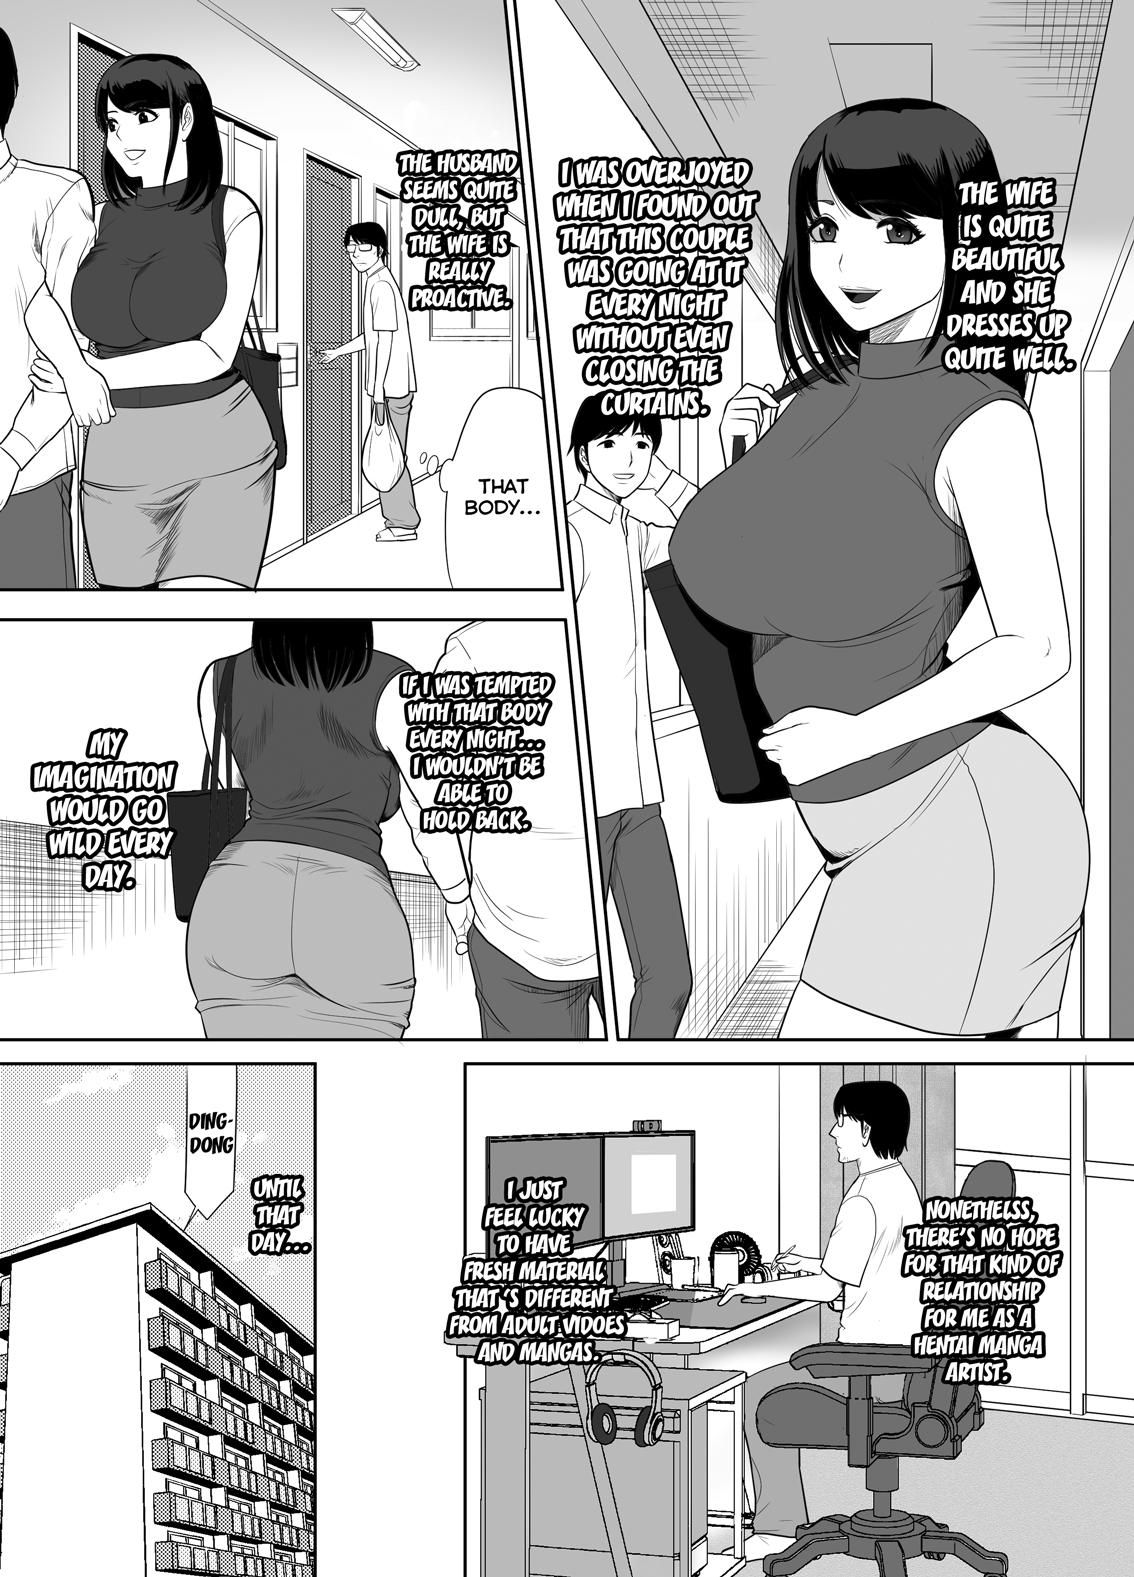 Horny Slut The Wife Next Door at an Urban Renaissance Housing Complex is being NTR'ed - Original Clit - Page 6